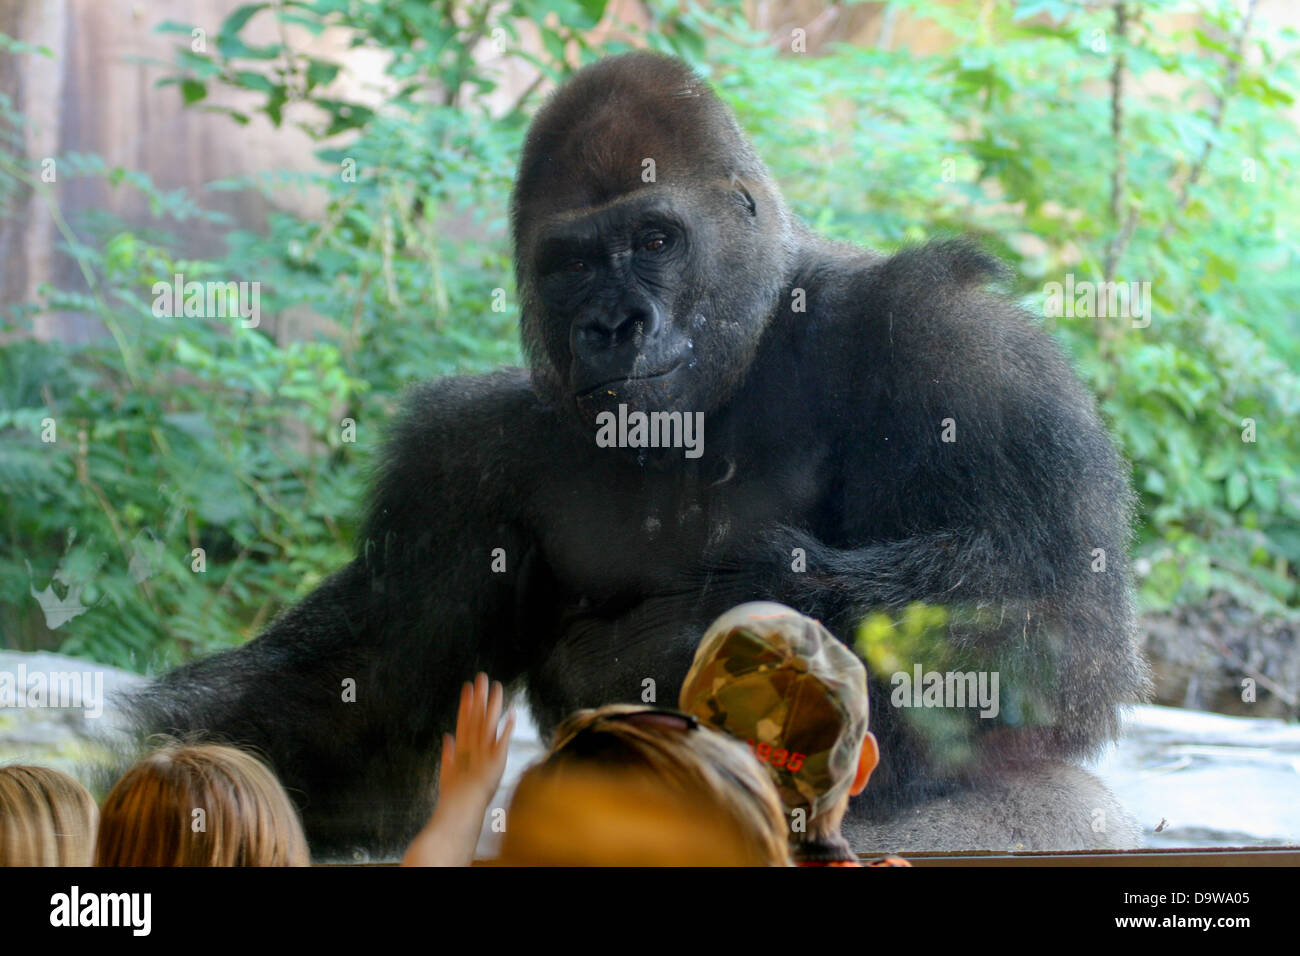 Gorilla and children at the zoo Stock Photo